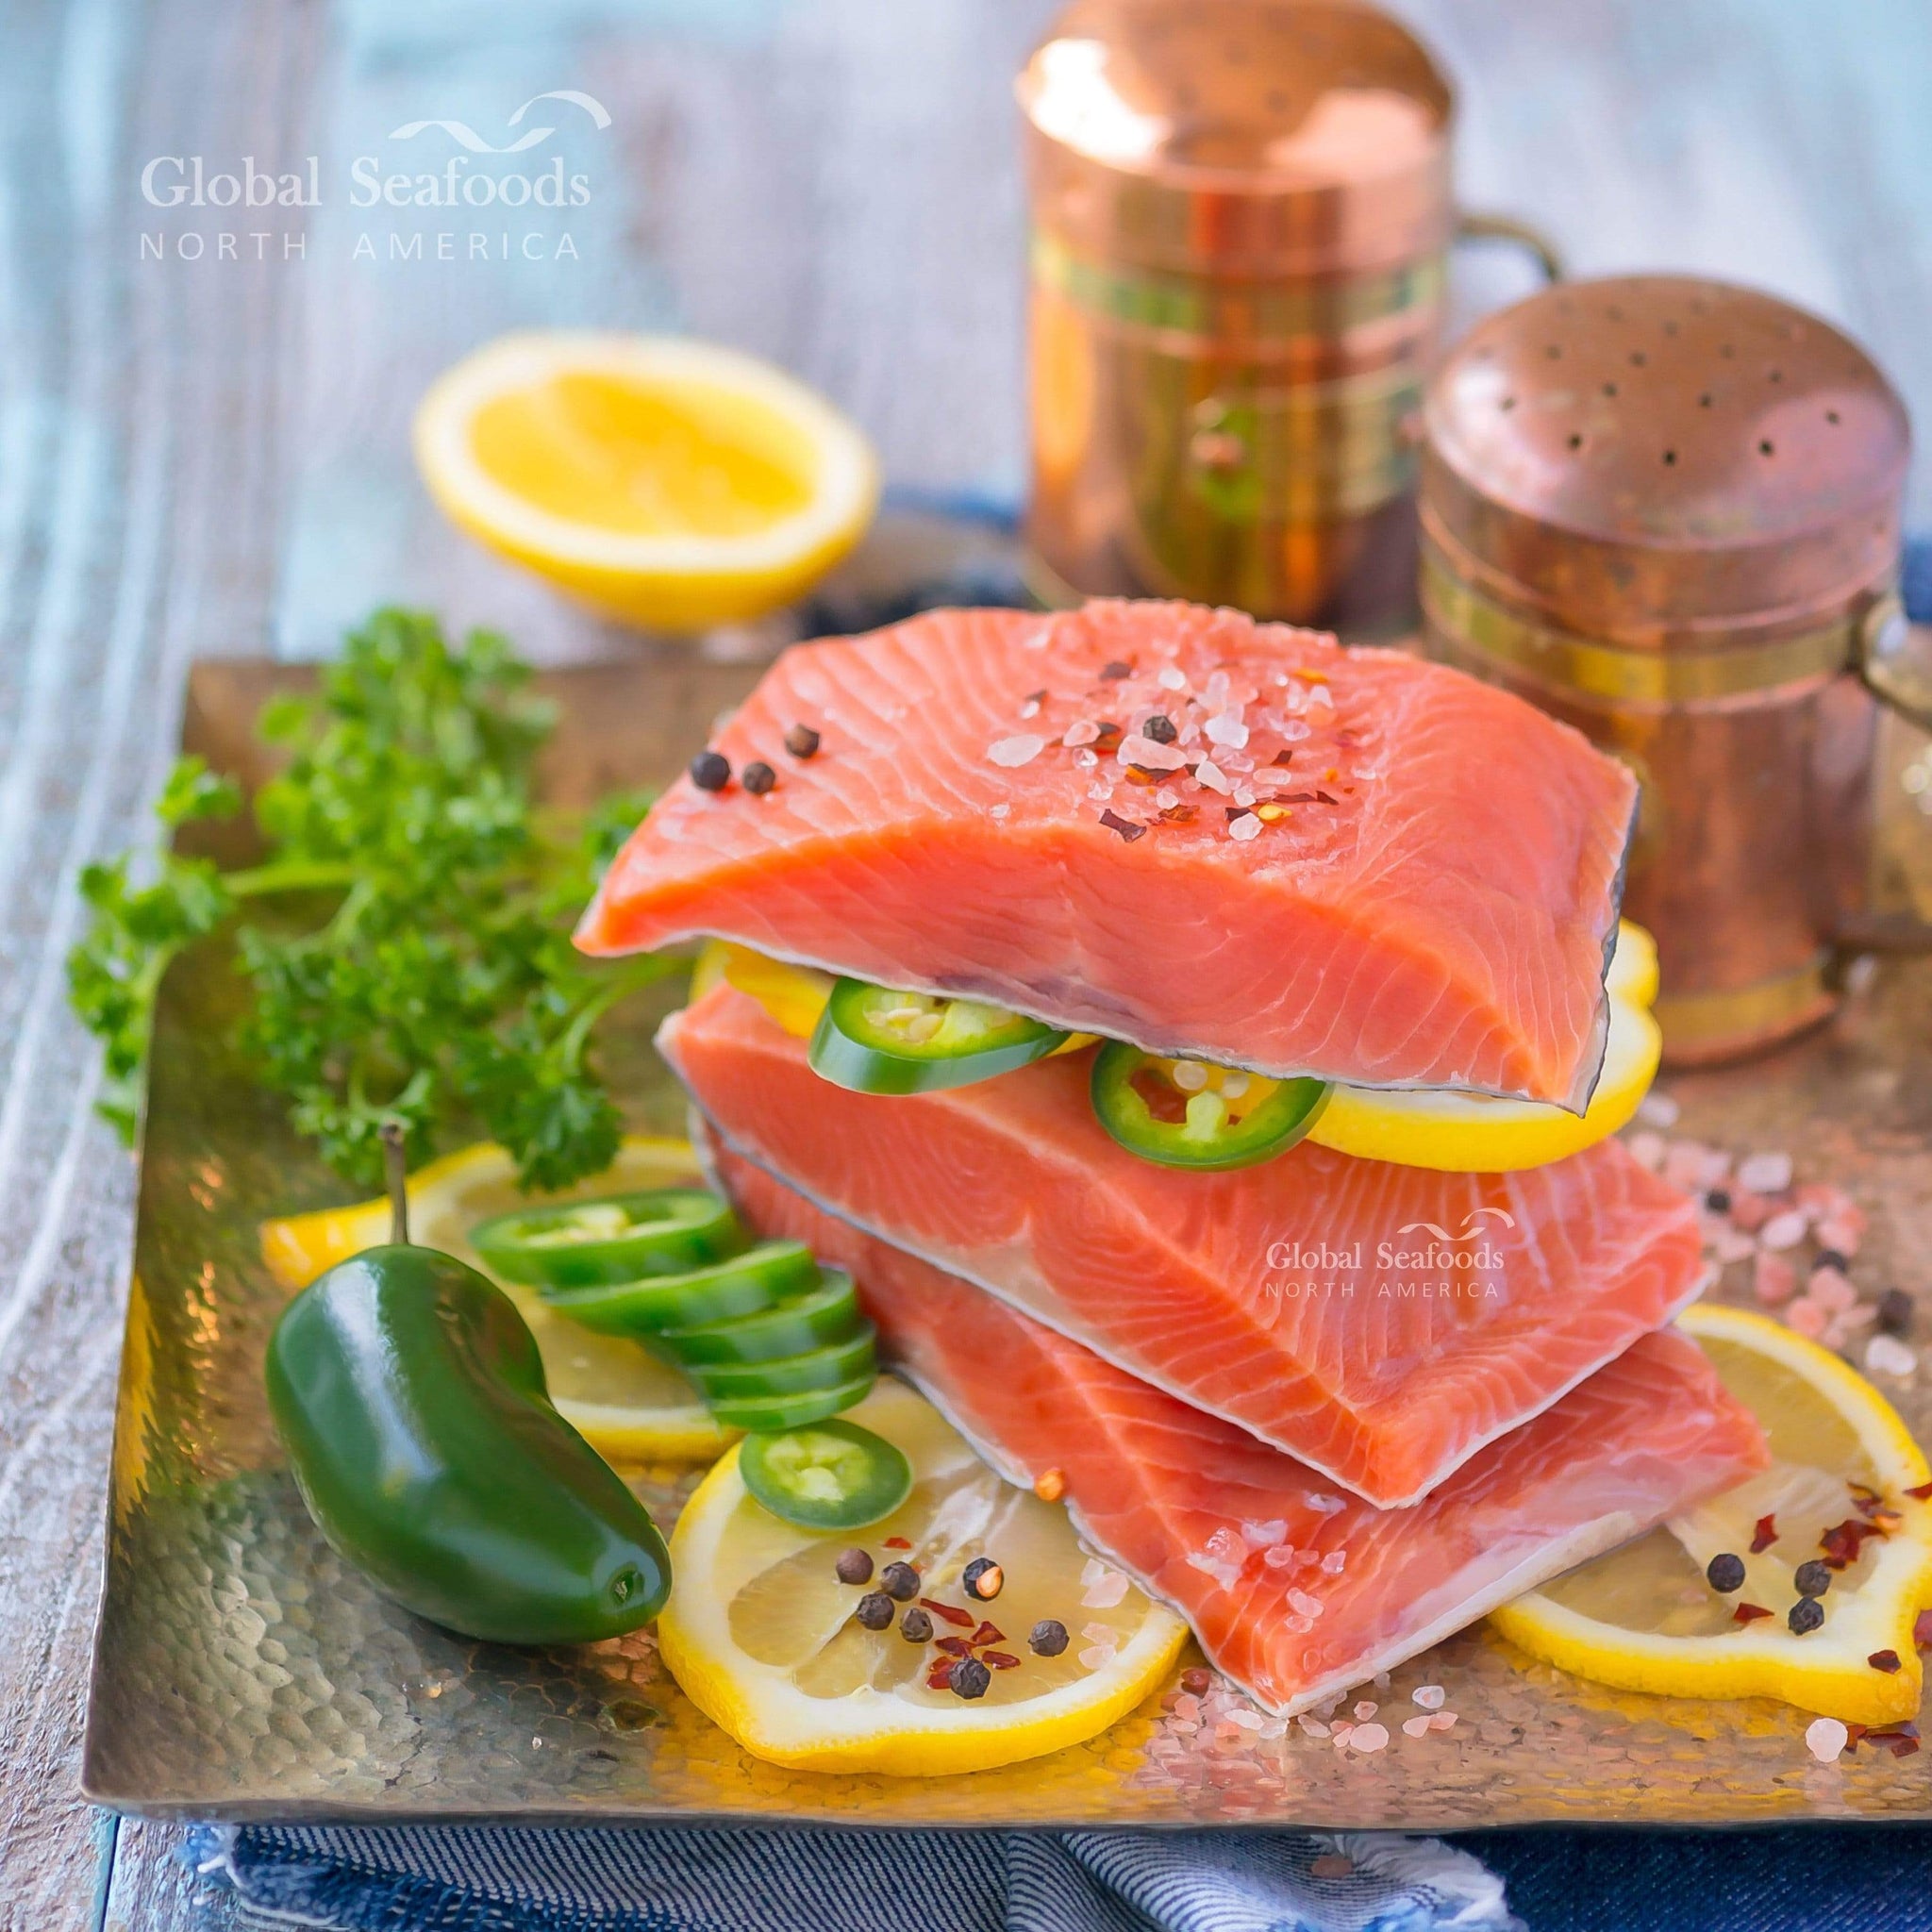 Wild-caught Alaskan King Salmon Fillet, 8 oz portion, displayed on ice, showcasing its vibrant color and fresh quality